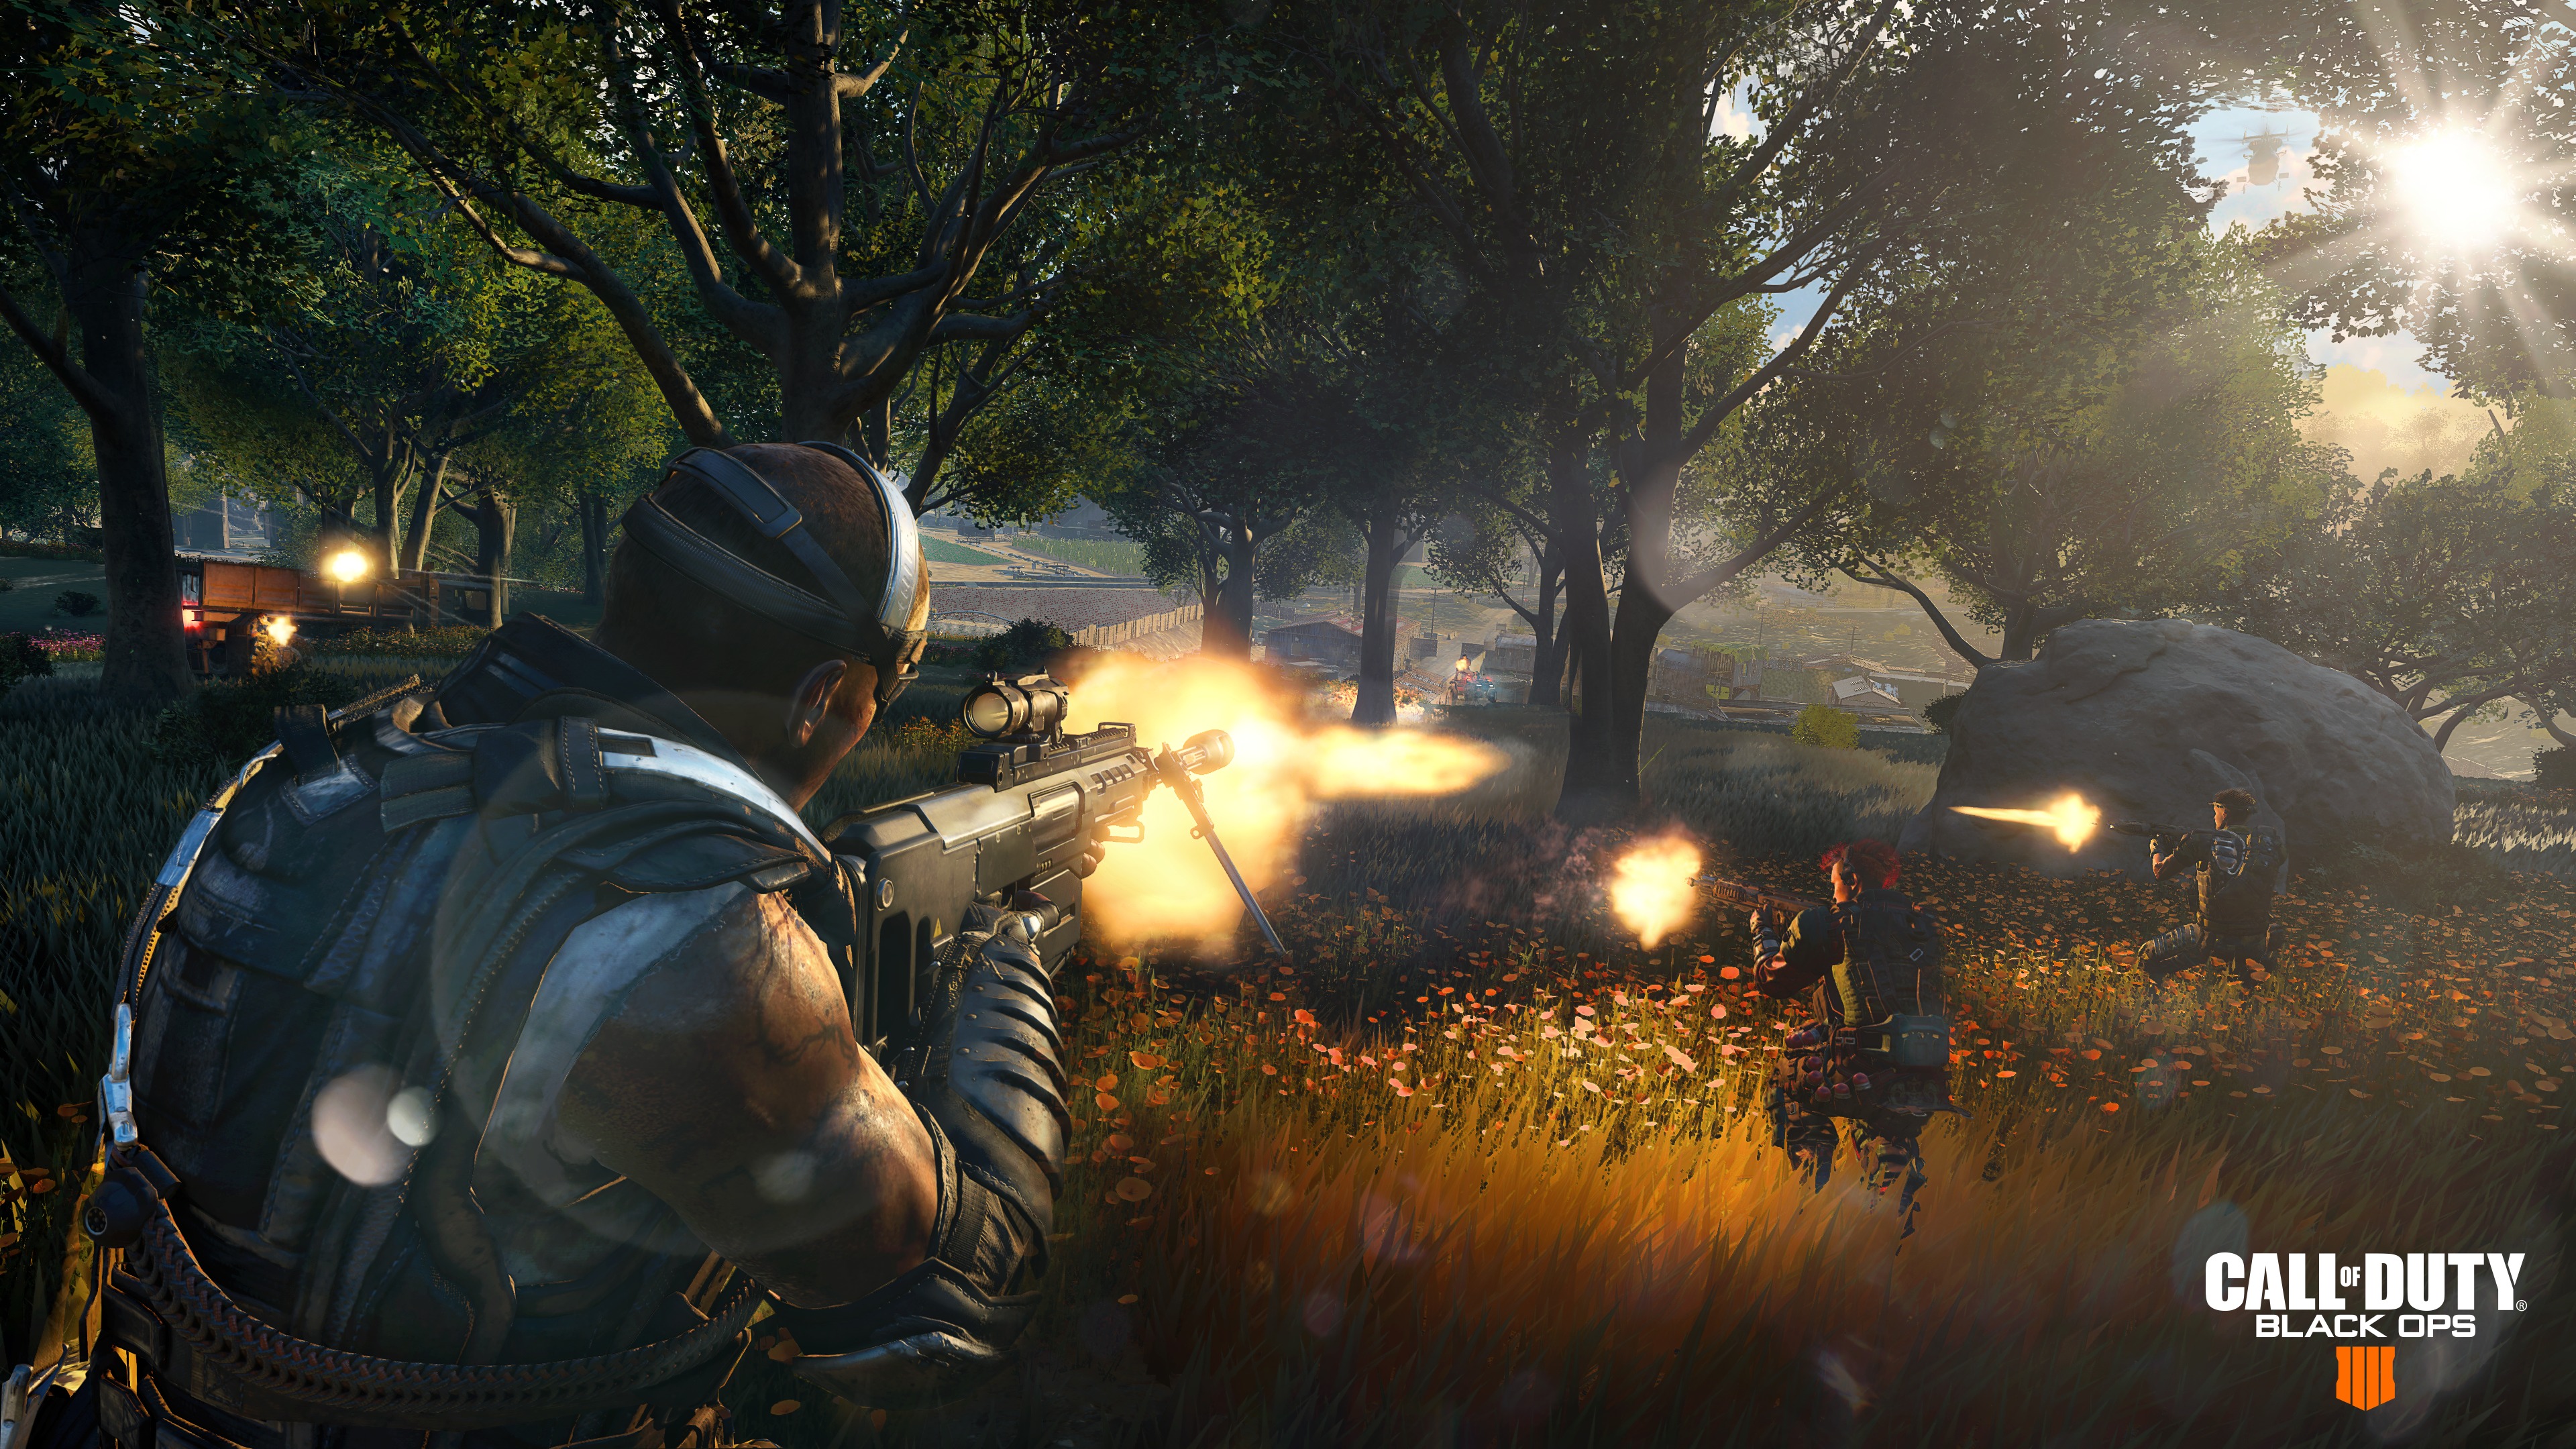 Call of Duty Black Ops 4's Blackout mode won't have a hardcore playlist at launch.